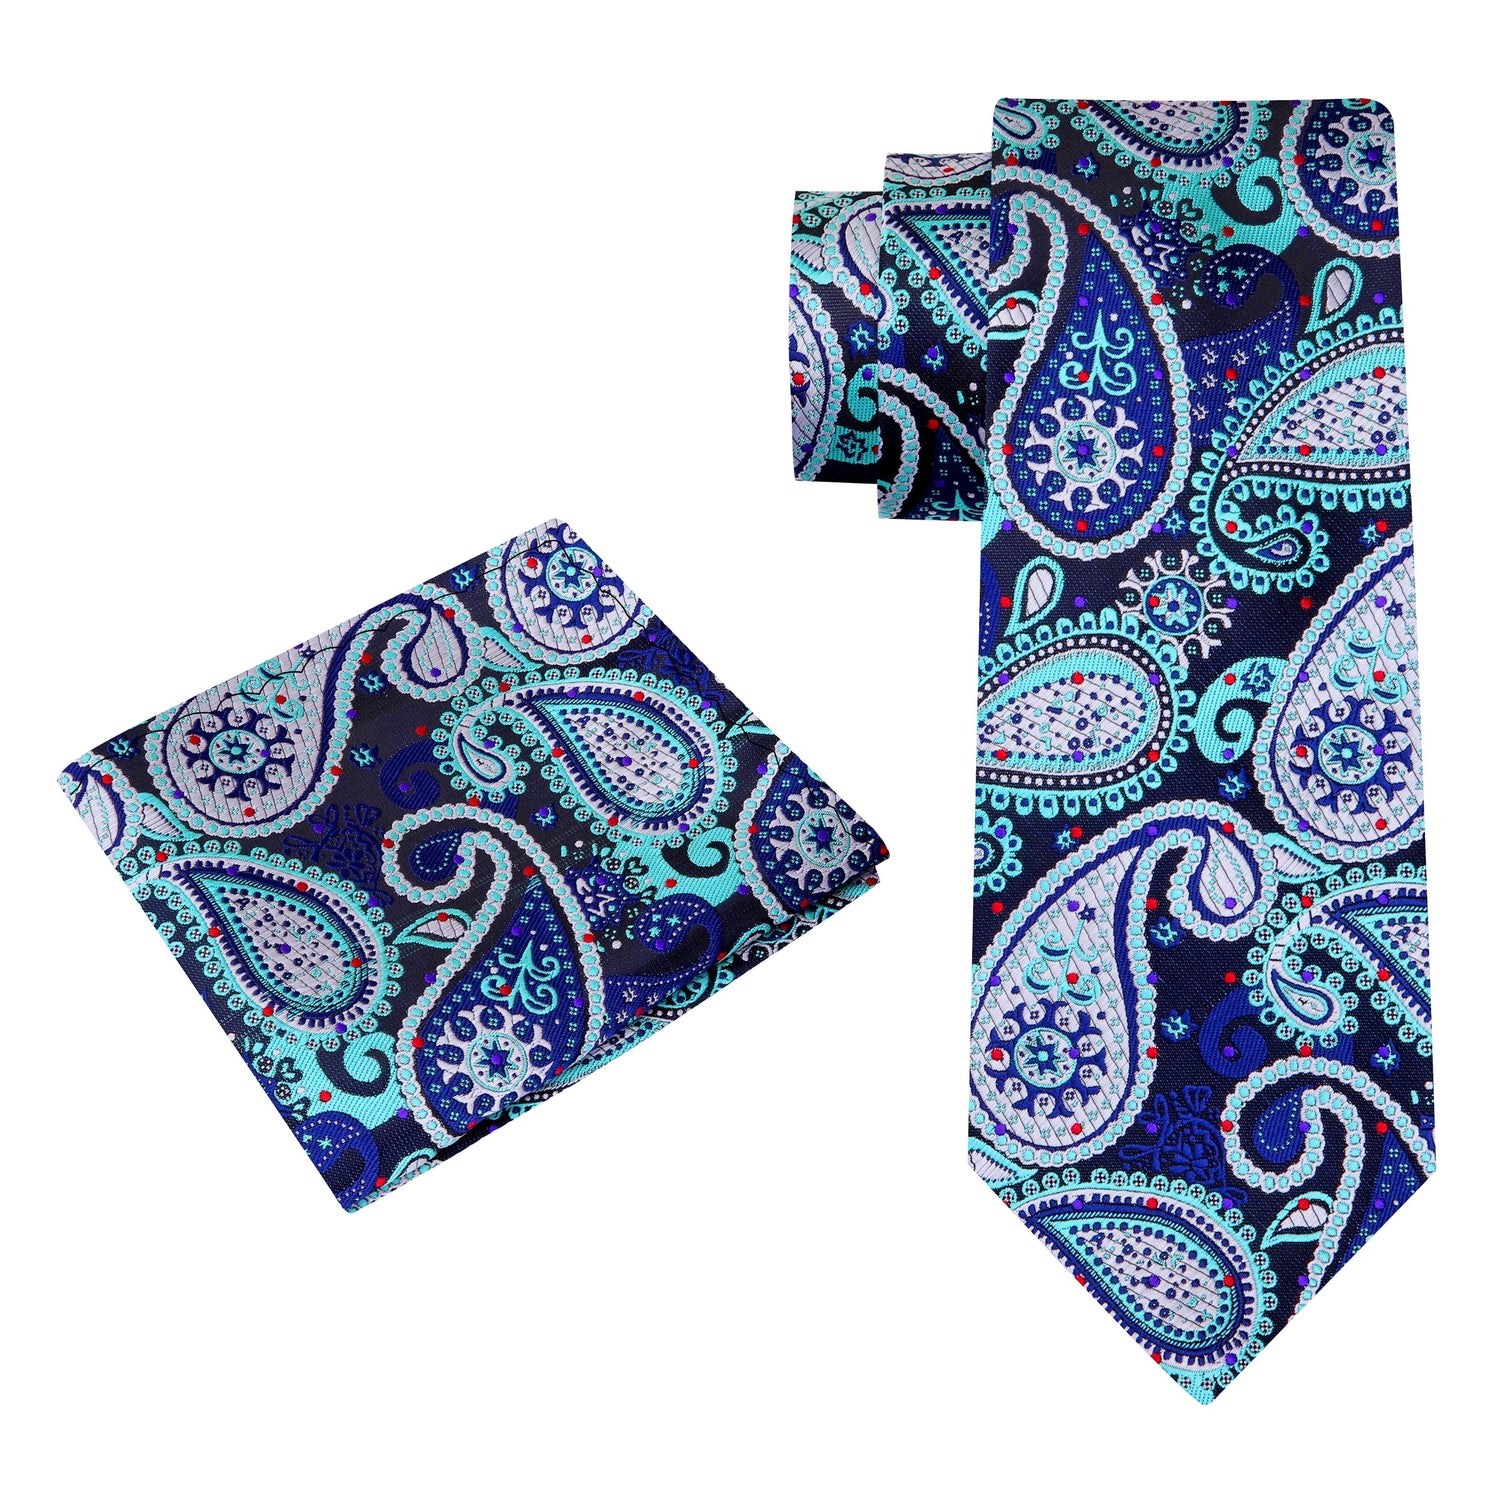 Alt View: Black, Ice, Blue, Red Paisley Tie and Pocket Square